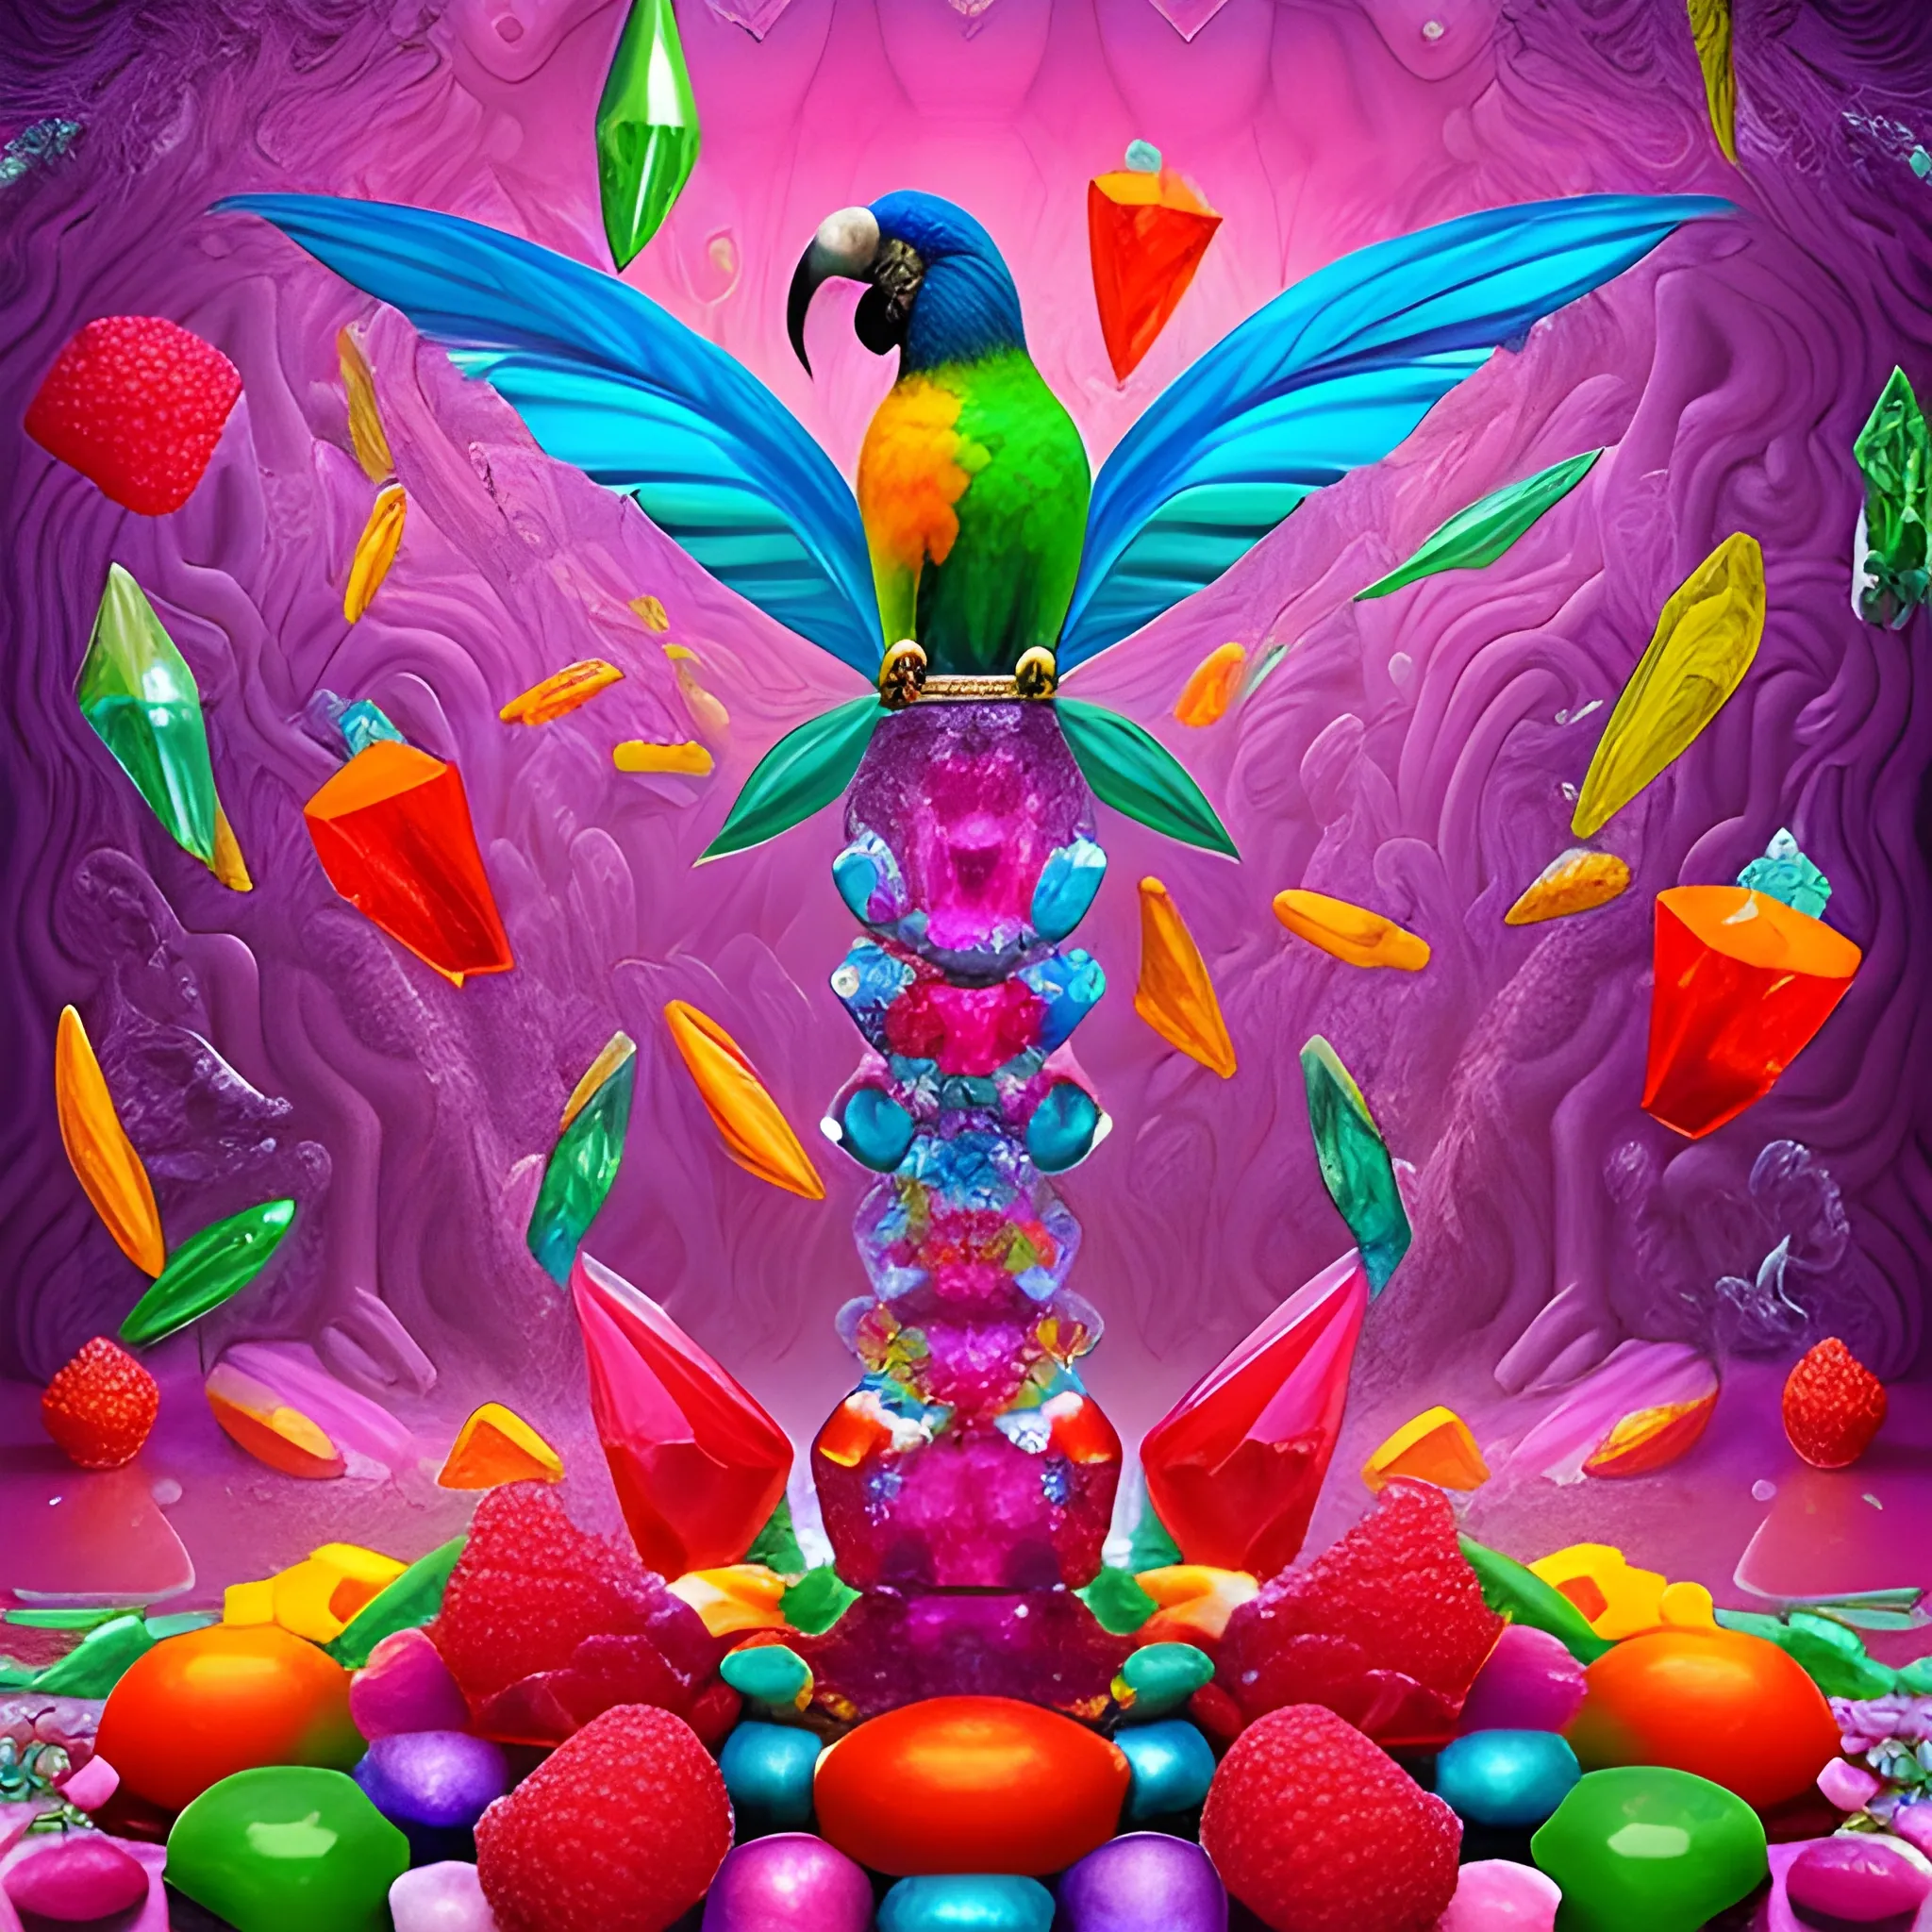 make a crystal sculpture of many crystal crazy raspberries with human face, crystal birds of paradise and  parrots around, many ice cubes  in the air, many plans of Amazon Rainforest, saturated colors, surrealism, chaotic background, 3D, Trippy,  eerie atmosphere, close up, Oil Painting, wide dynamic range 